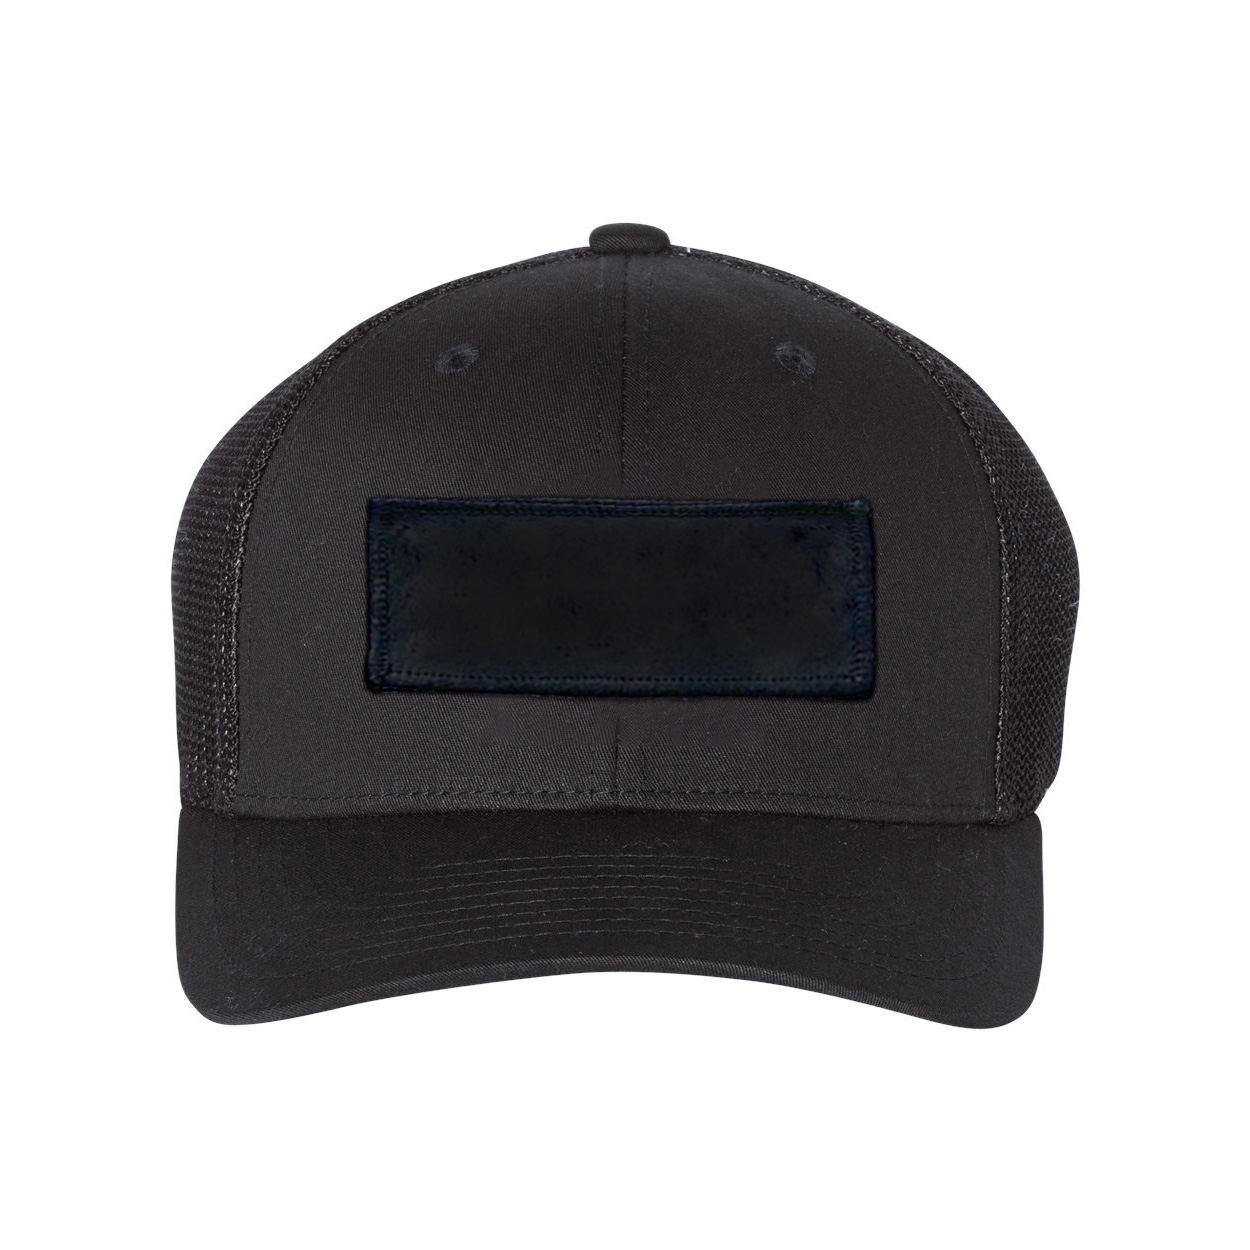 Product Details: Classic Woven Rectangle Patch Snapback Trucker Hat Black (BW 6 PANEL SNAPBACK MESH 5216)